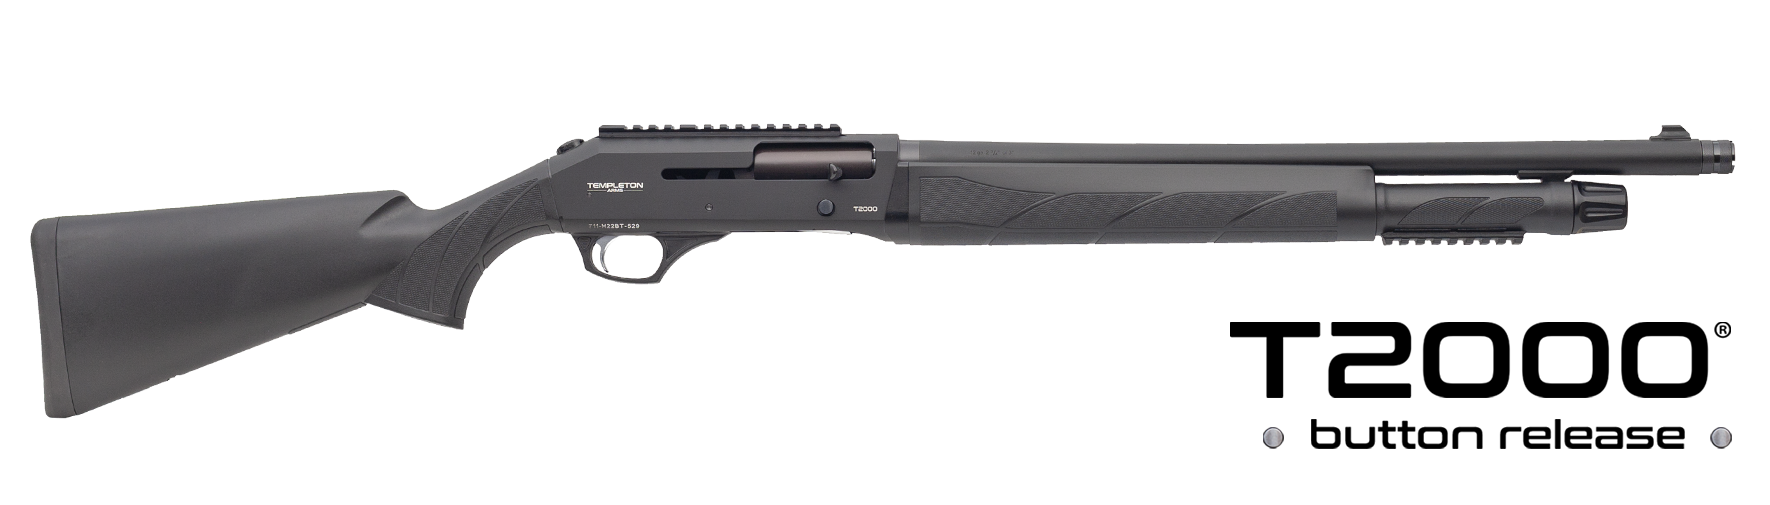 Templeton Arms T2000 Tactical 20"